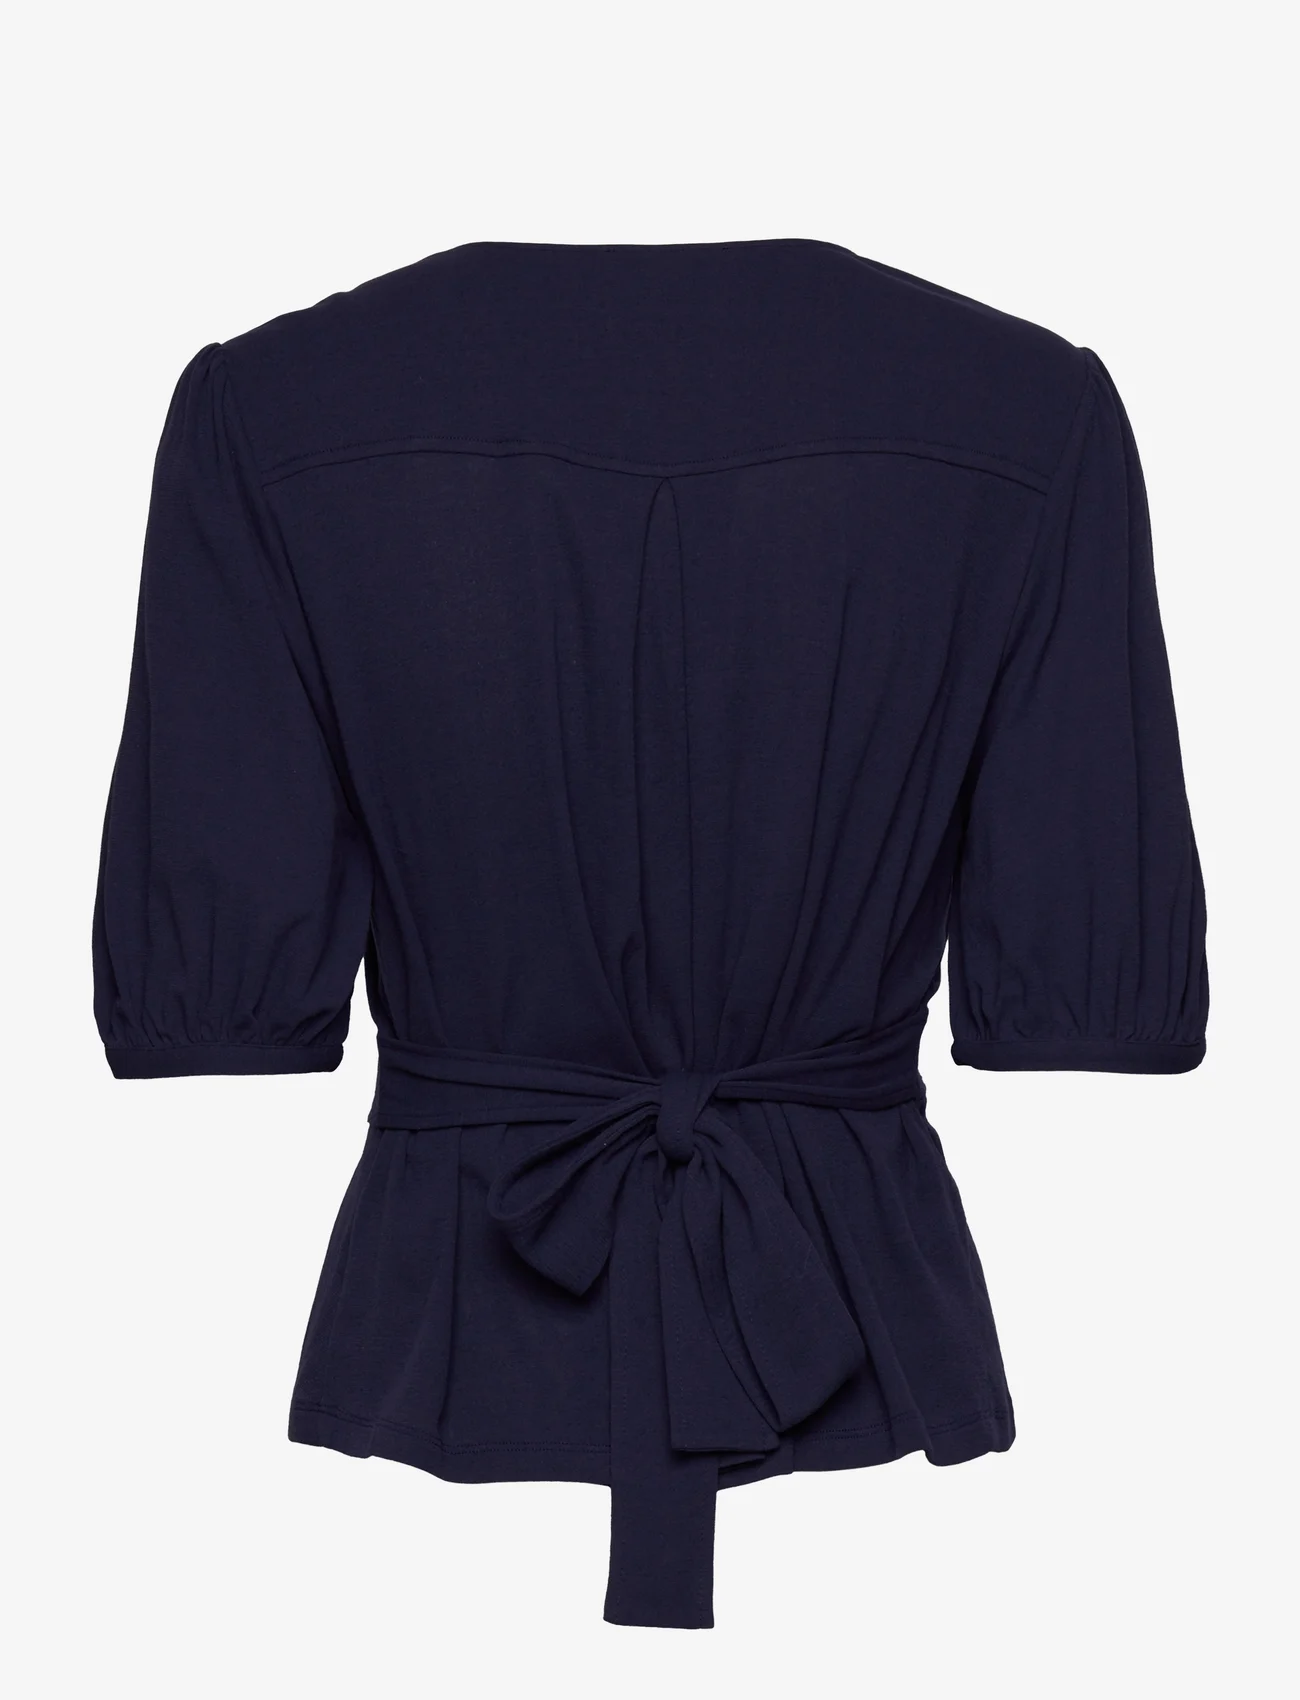 See by Chloé - Top - blouses korte mouwen - evening blue - 1